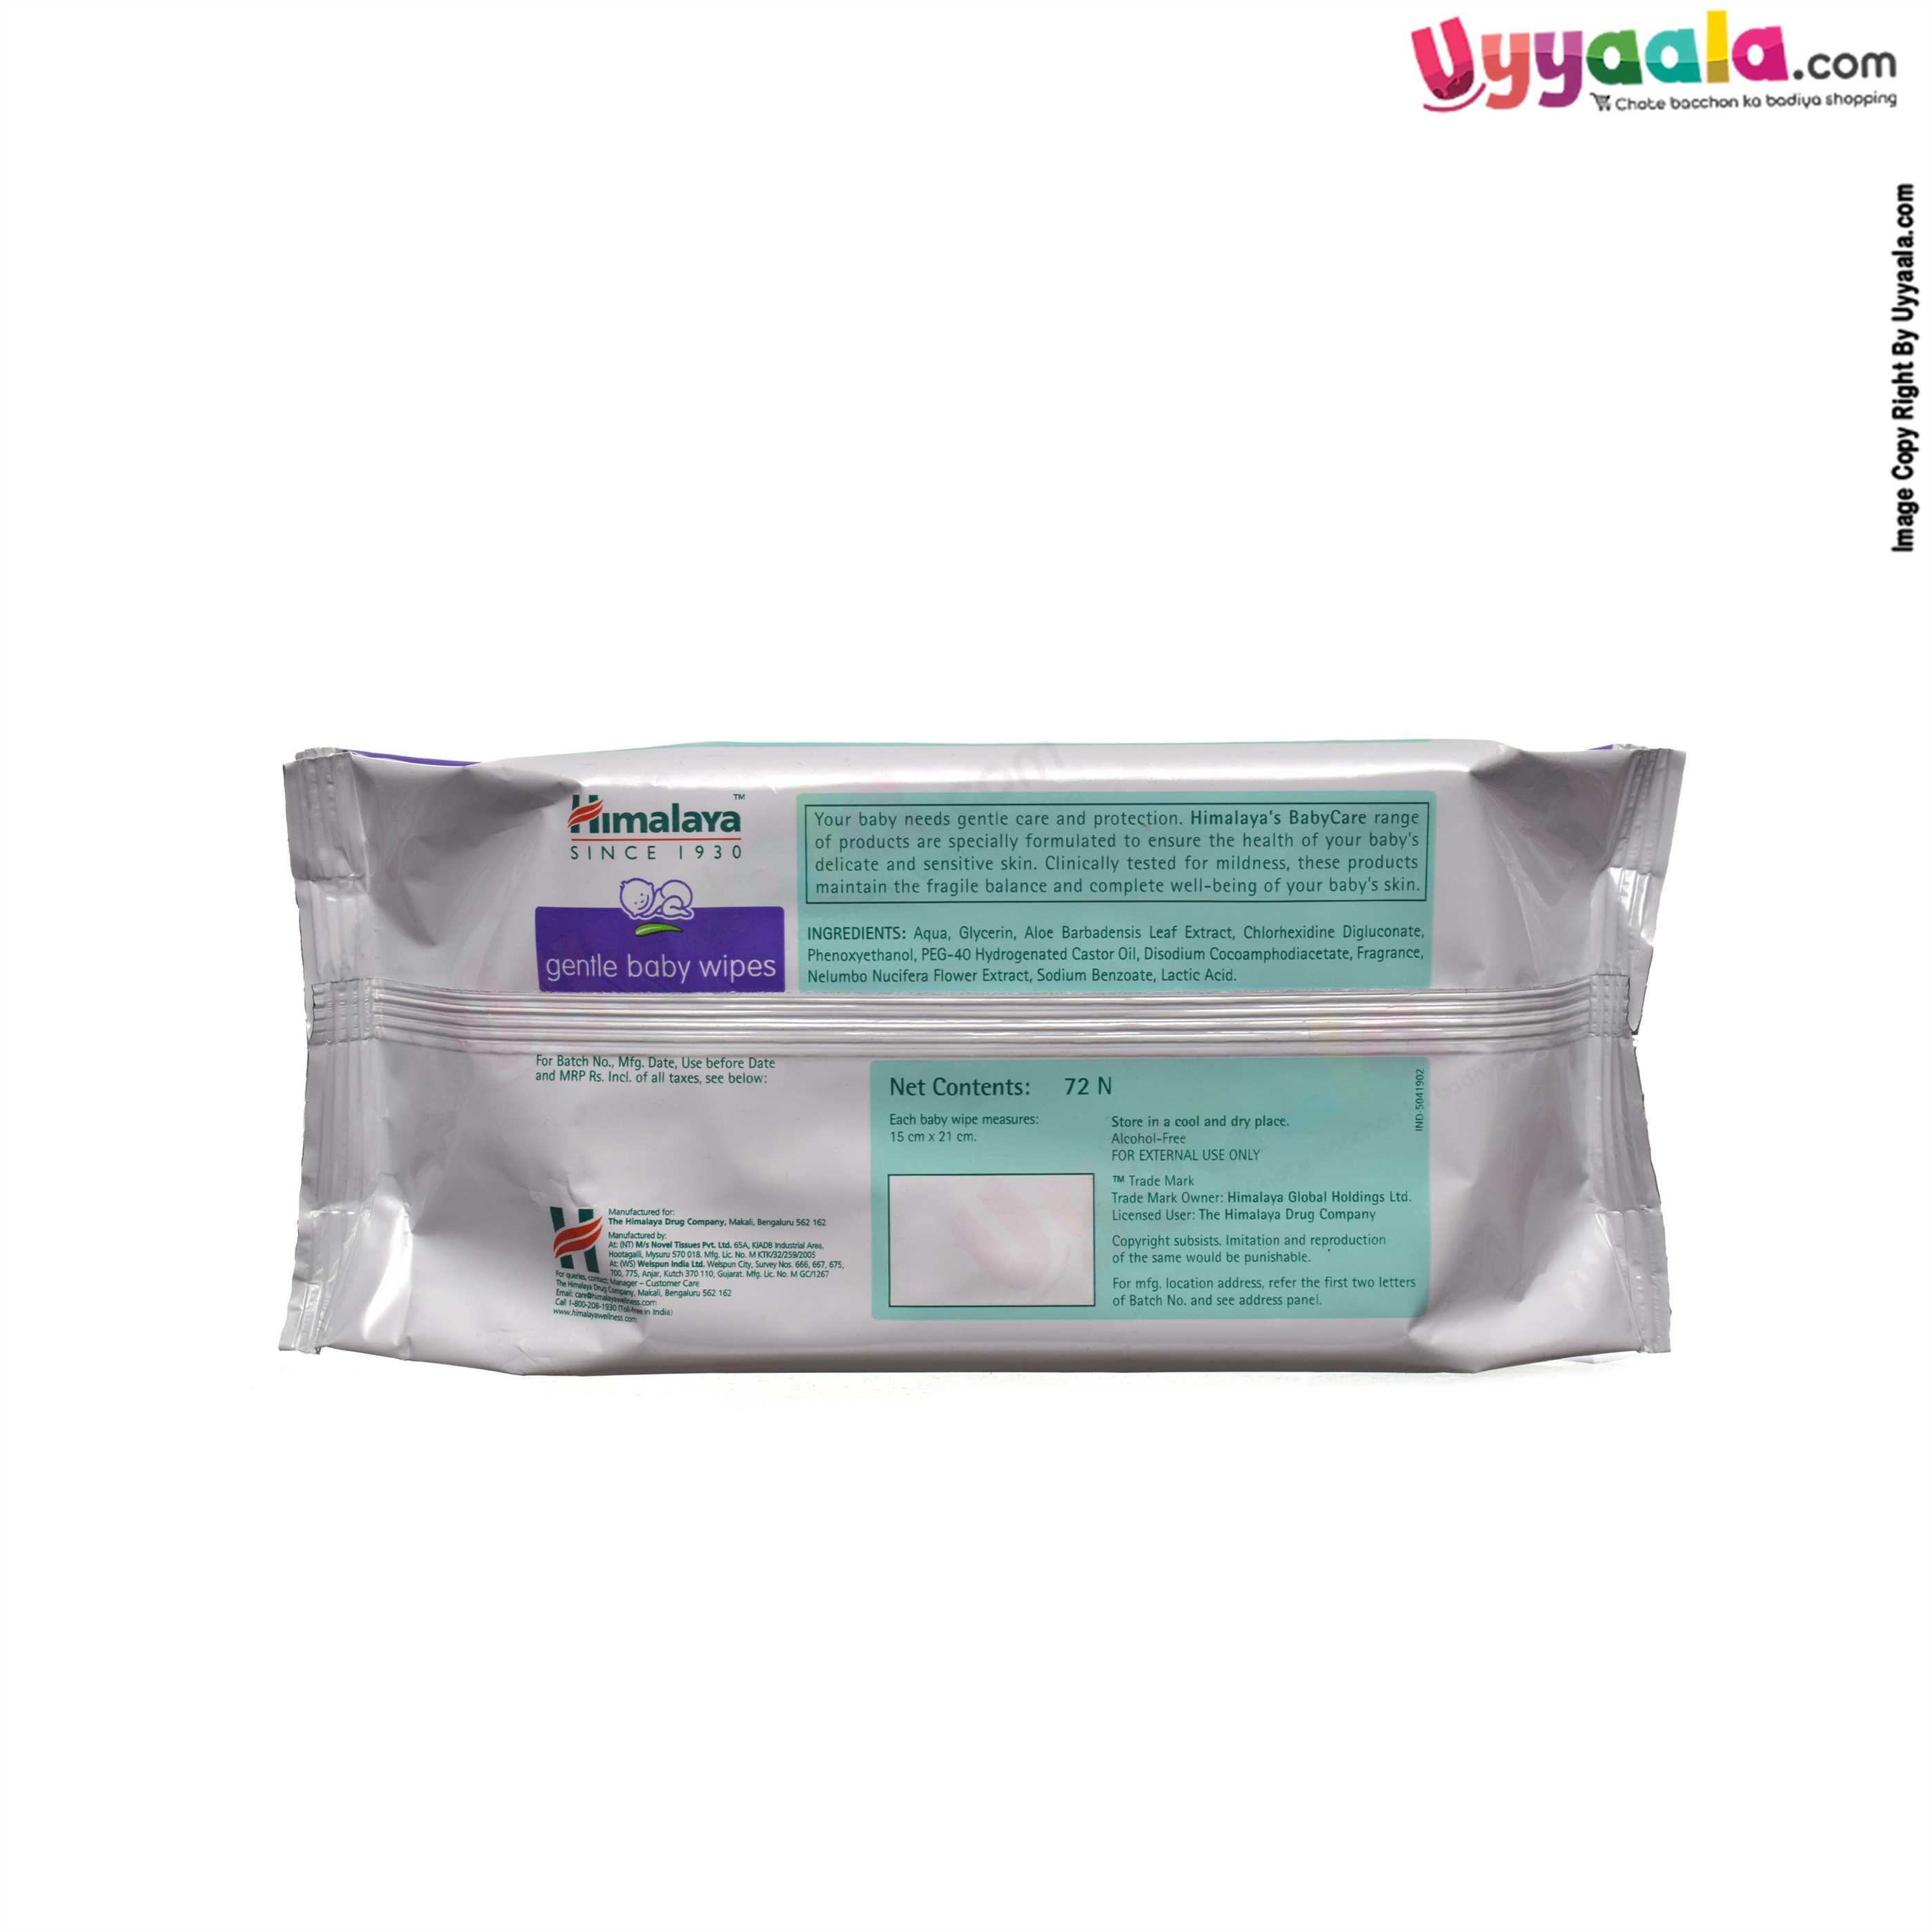 Himalaya Baby Diapers, with its... - Bhat Bhateni Supermarket | Facebook